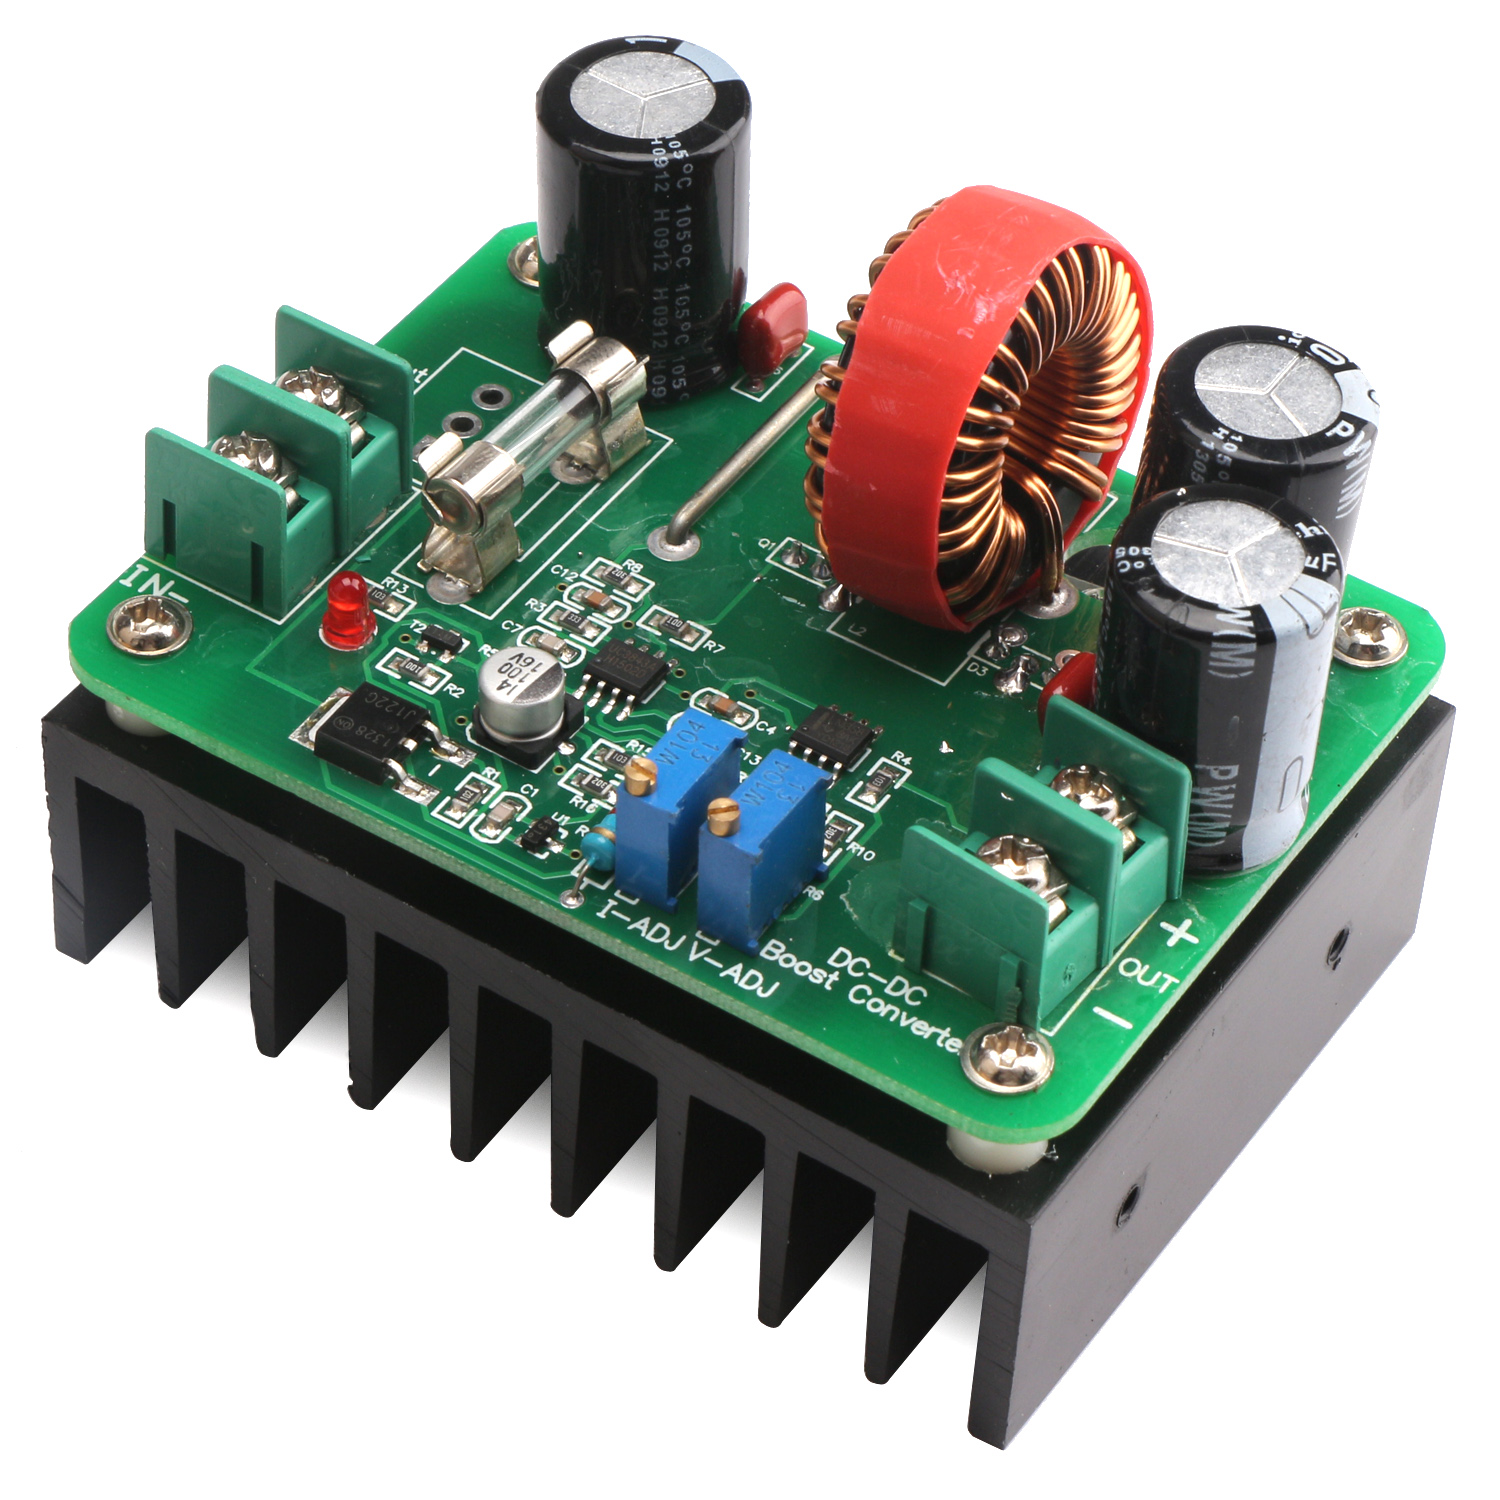 New DC-DC 600W 10-60V to 12-80V Boost Converter Step-up Module car Power Supply 